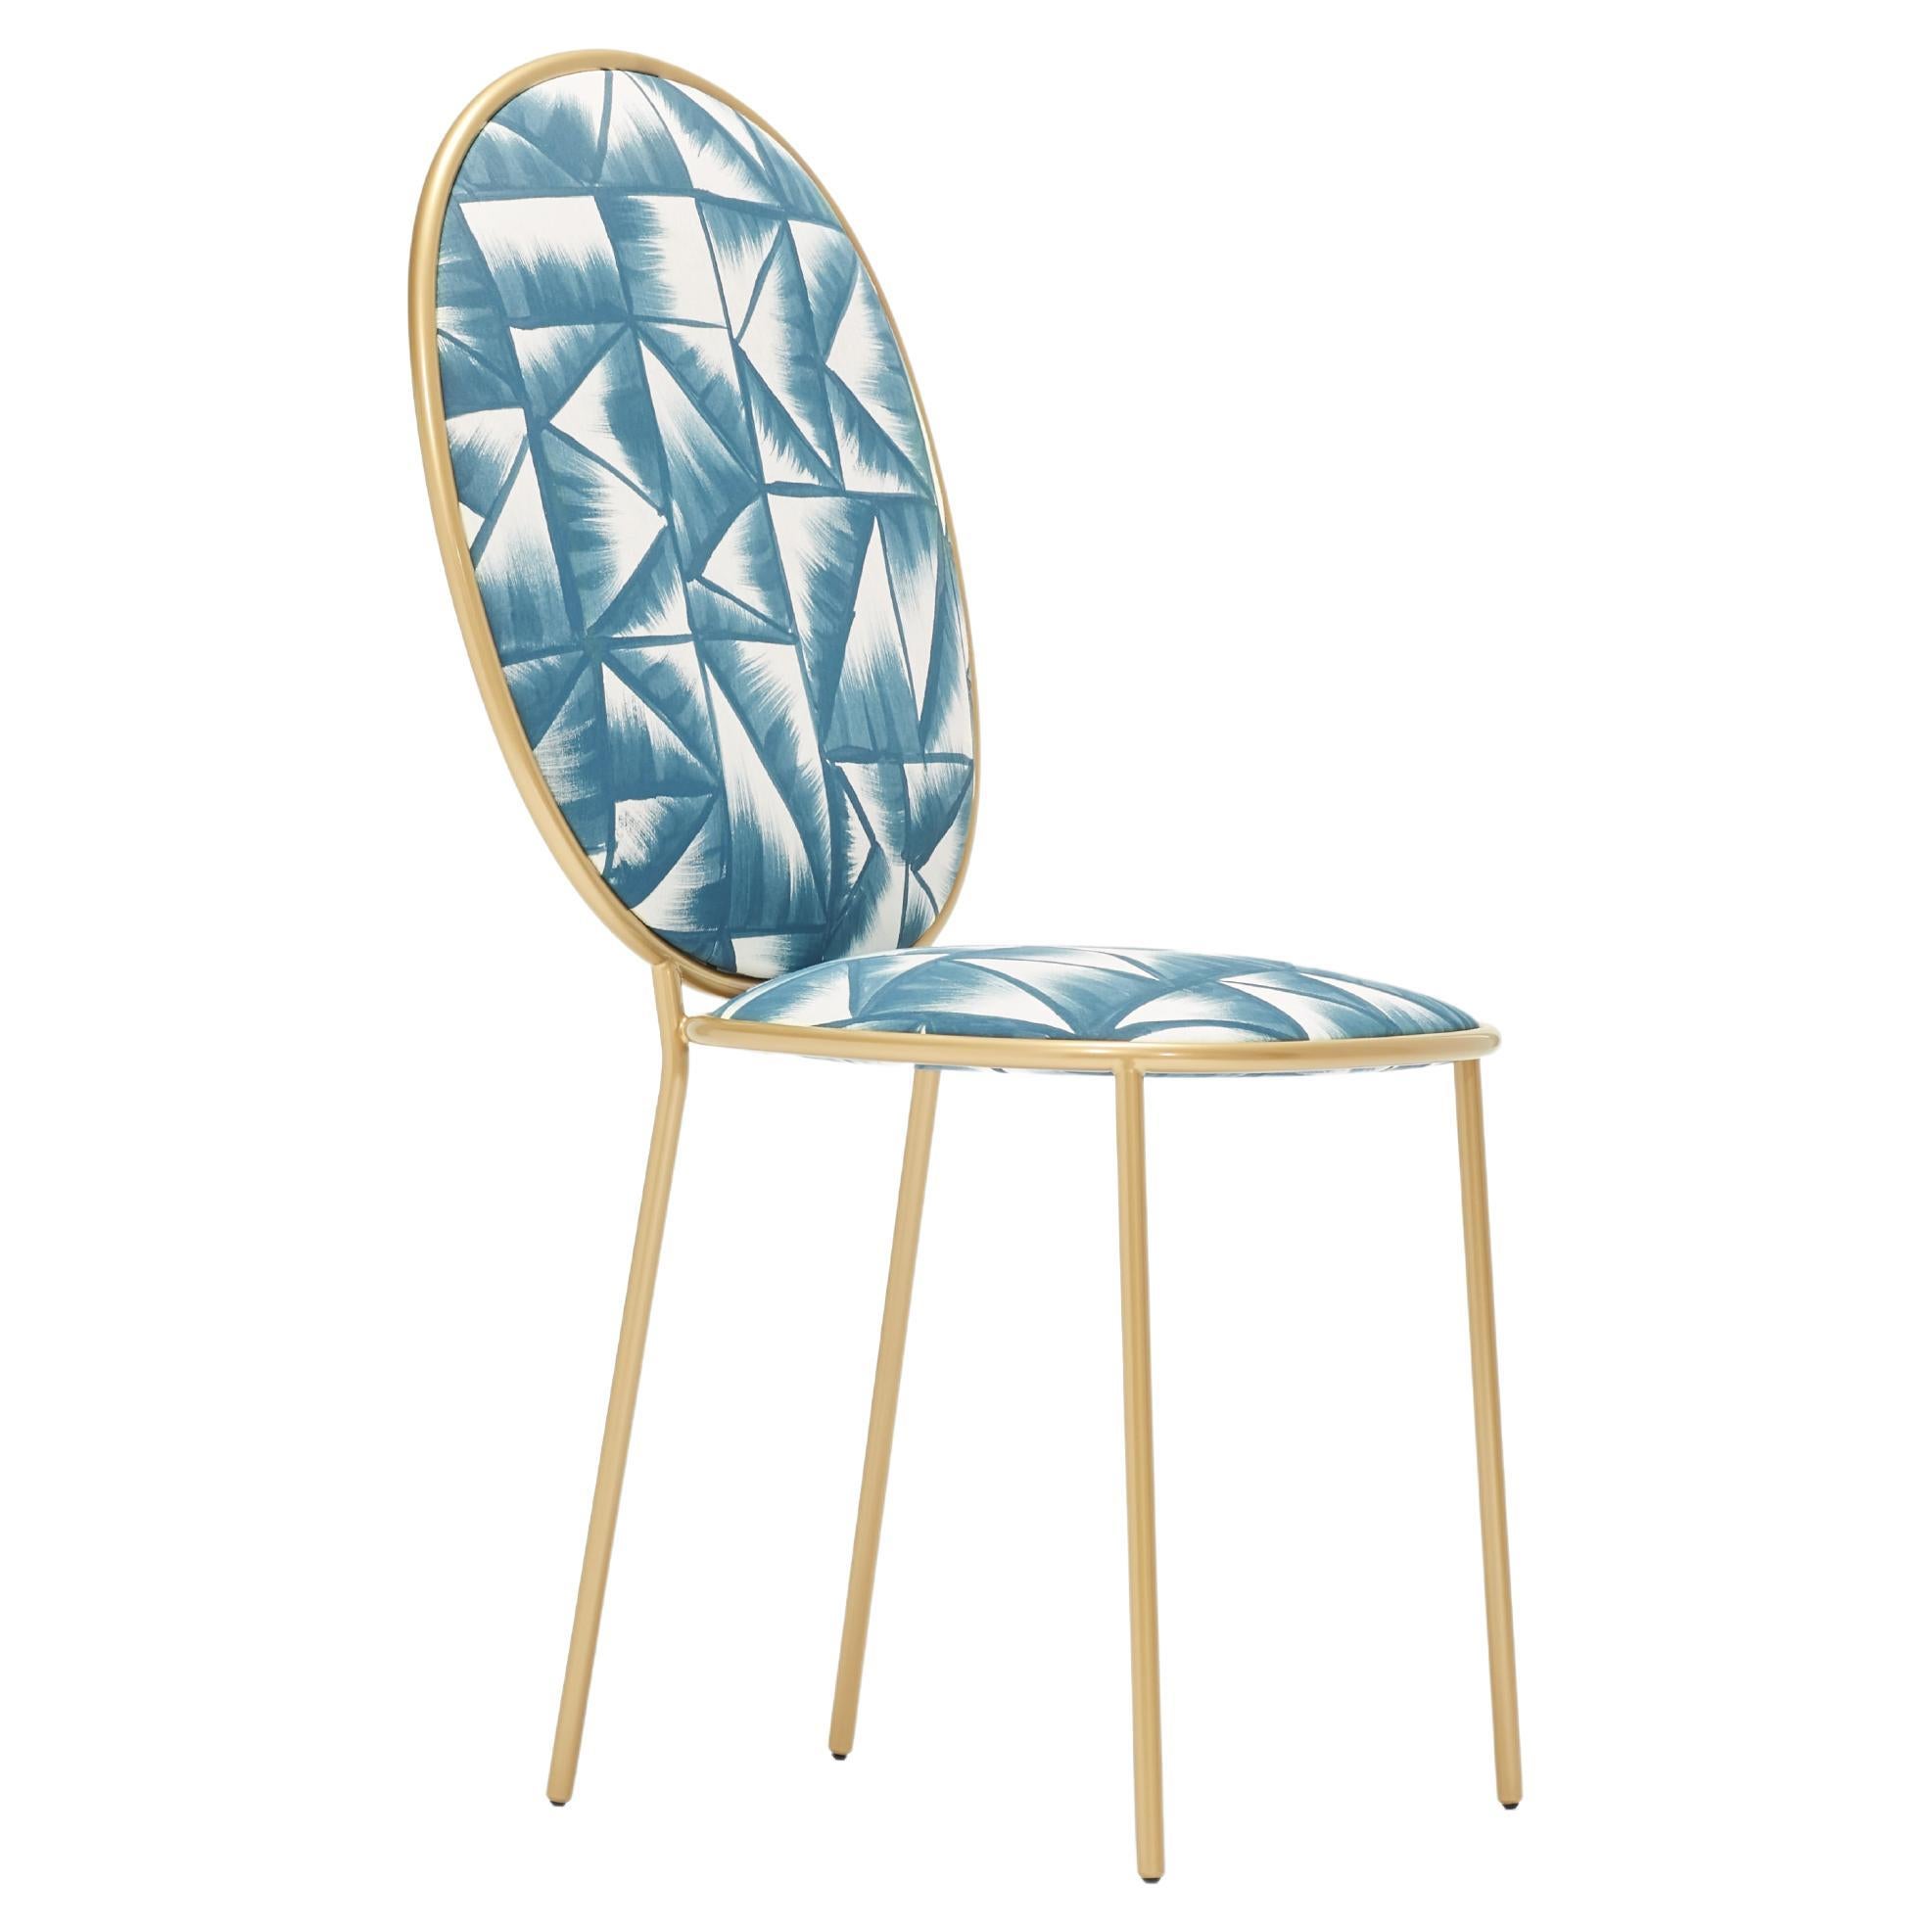 Contemporary Fresco Blue Upholstered Dining Chair, Stay by Nika Zupanc